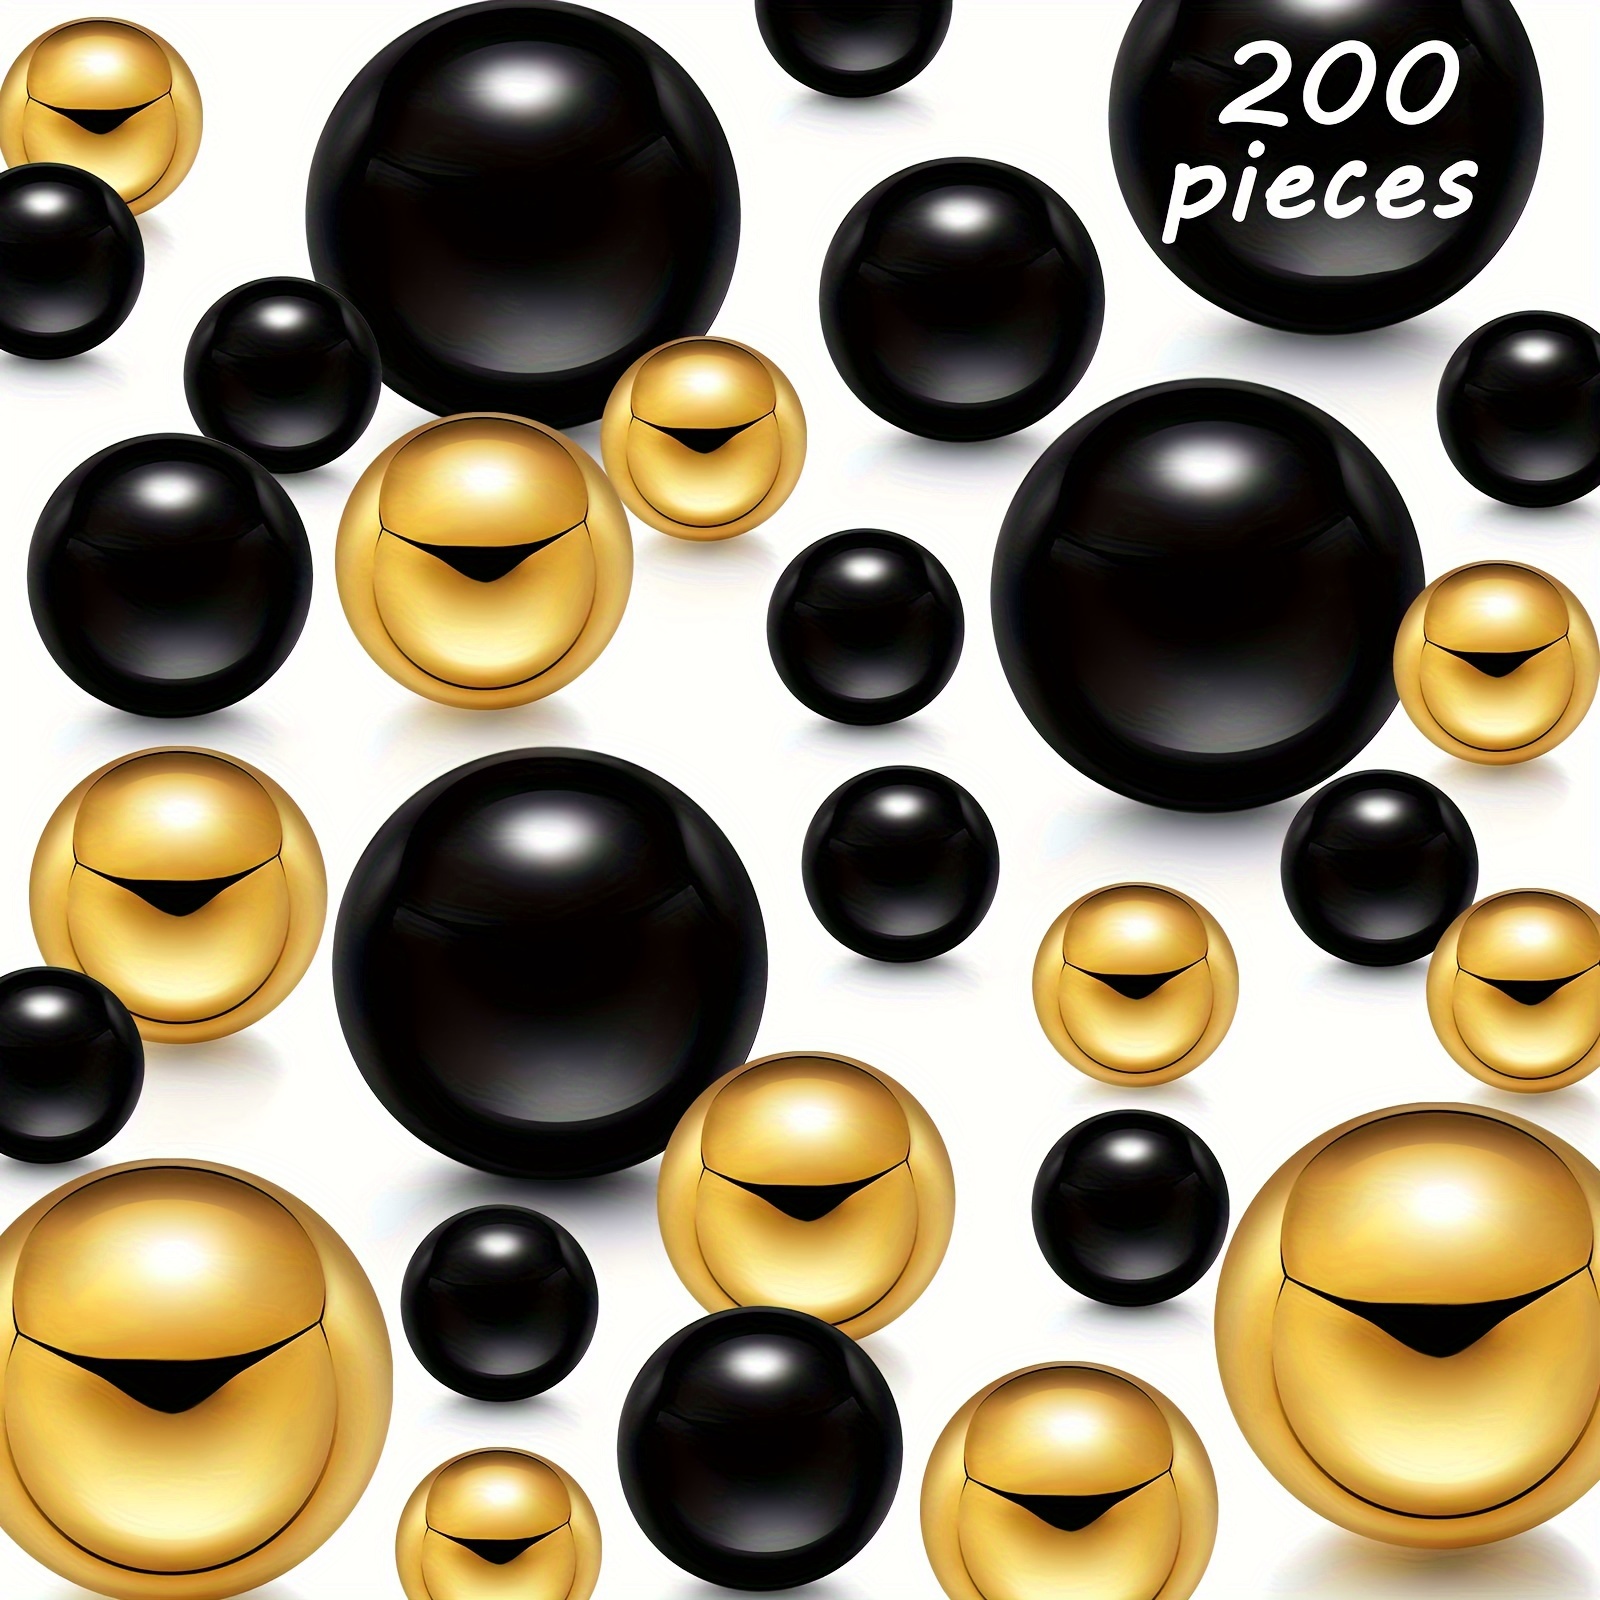 

200pcs Vase Filler Faux Pearls Vase Makeup Brush Beads Bulk No Hole Gloss Pearl Beads Mixed Sizes Round Pearls For Vase Home Party Wedding Decor, 10/20 Mm (gold, Black/ Red, White)